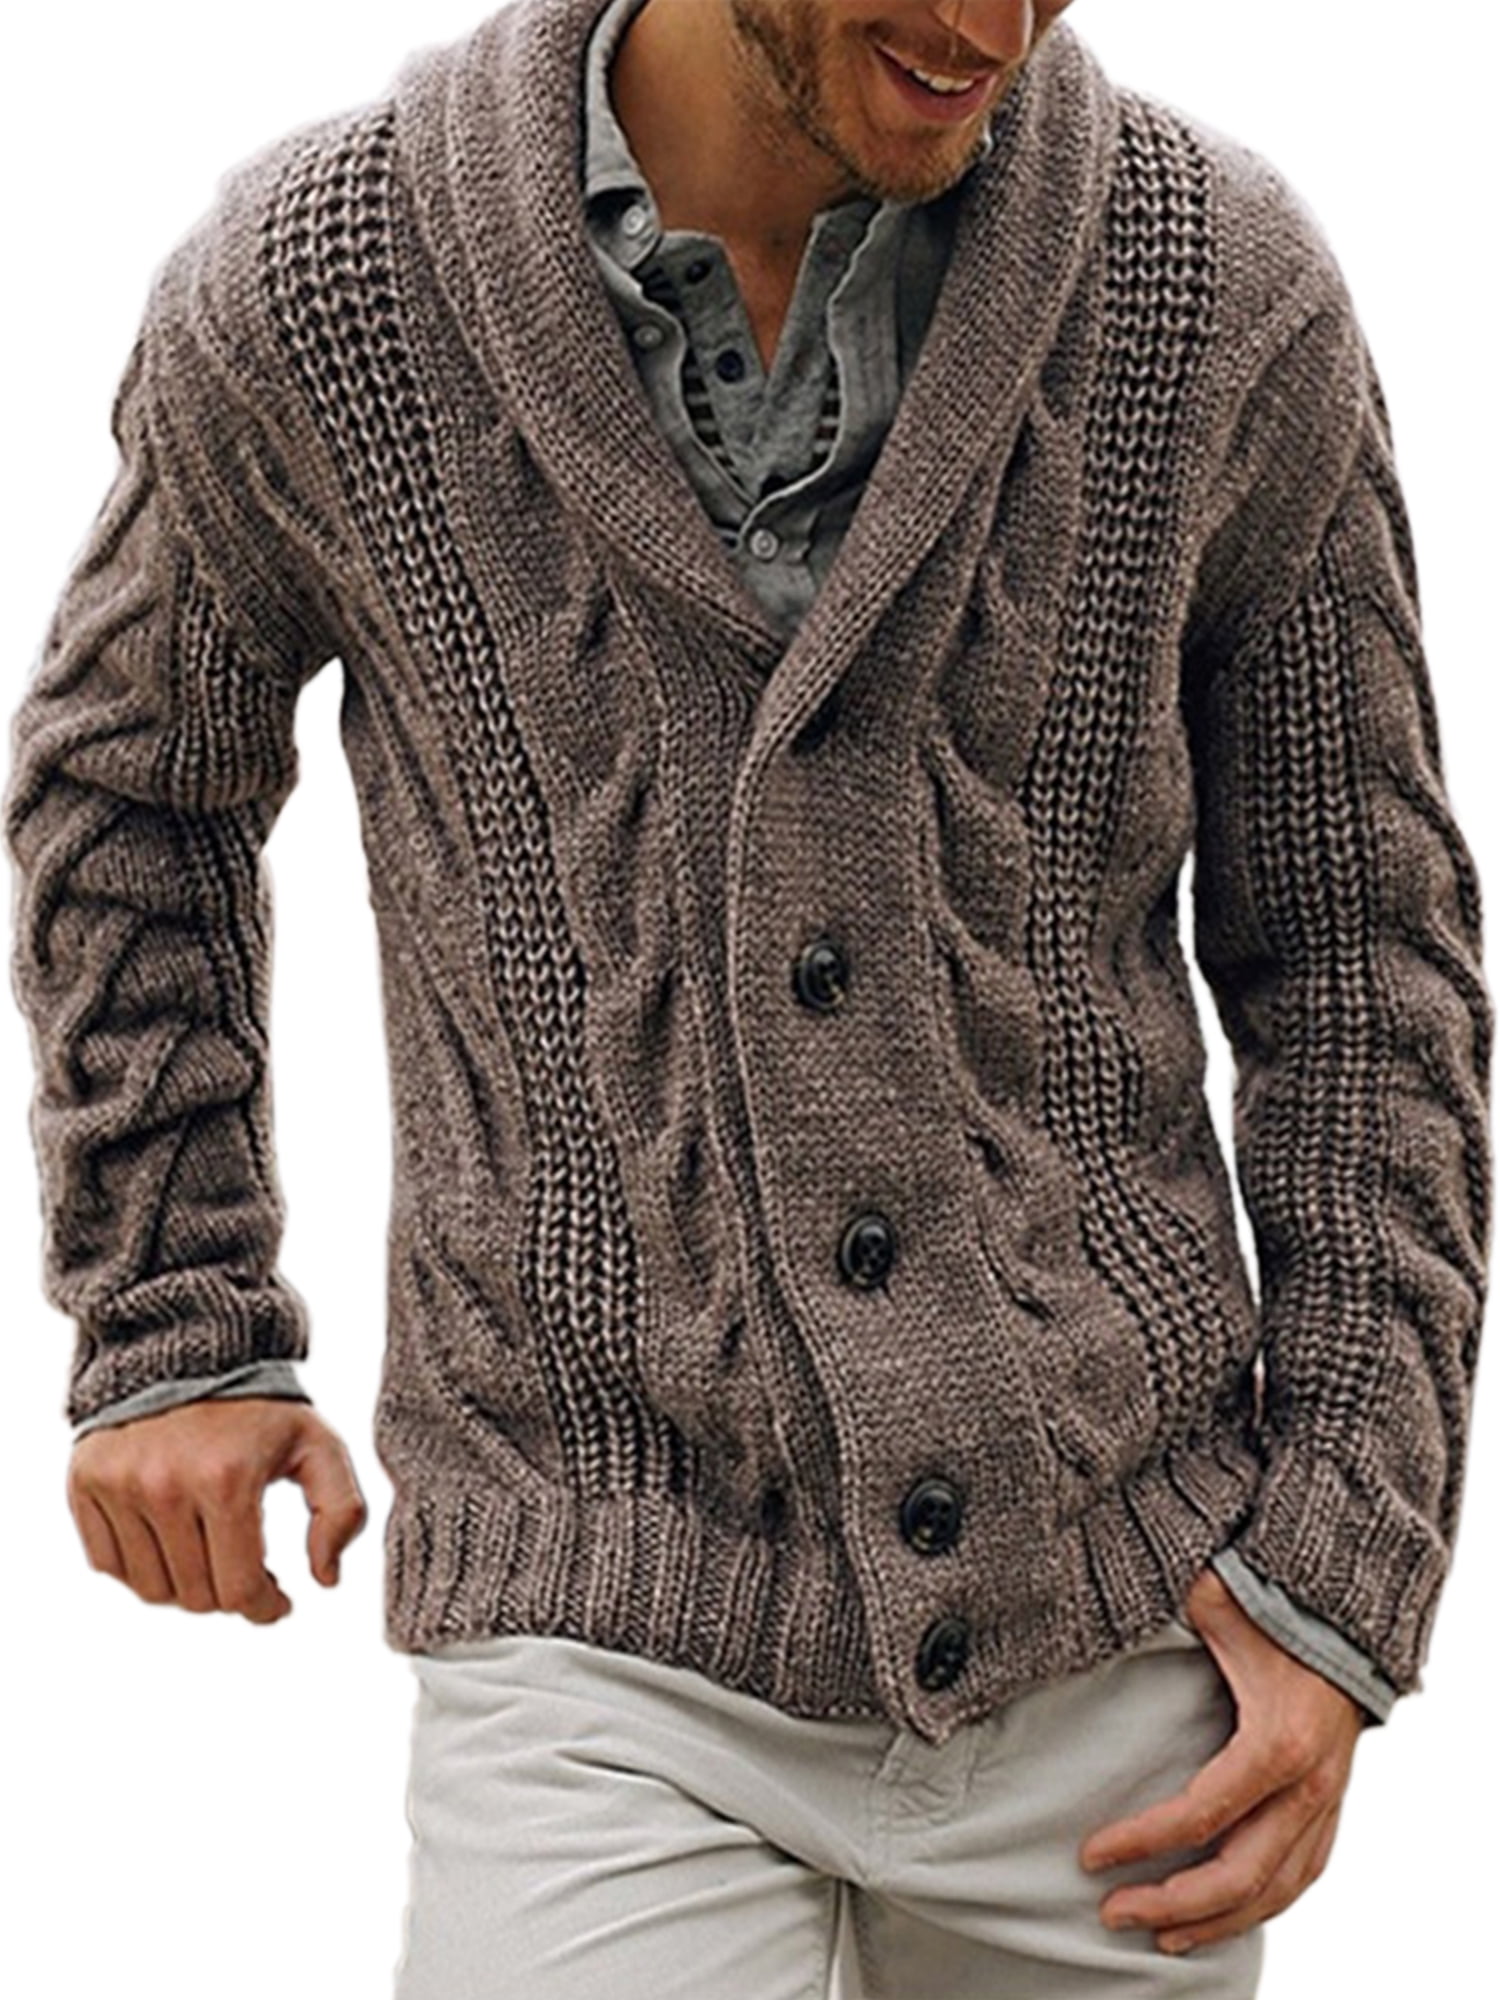 Generic Mens Casual V-neck Long Sleeves Cardigan Sweater 